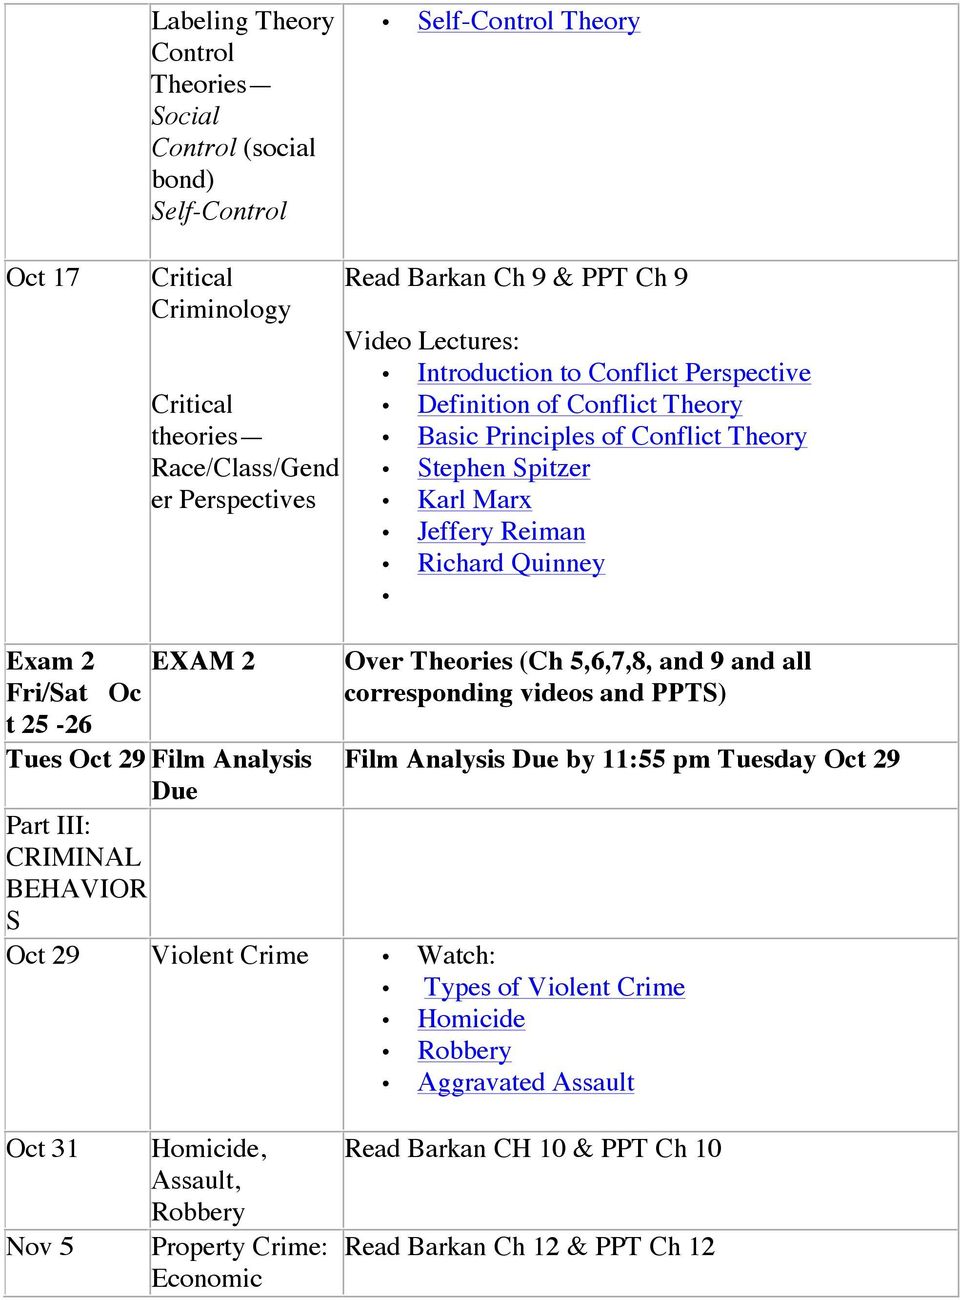 Oc t 25-26 Tues Oct 29 Film Analysis Over Theories (Ch 5,6,7,8, and 9 and all corresponding videos and PPTS) Film Analysis Due by 11:55 pm Tuesday Oct 29 Due Part III: CRIMINAL BEHAVIOR S Oct 29